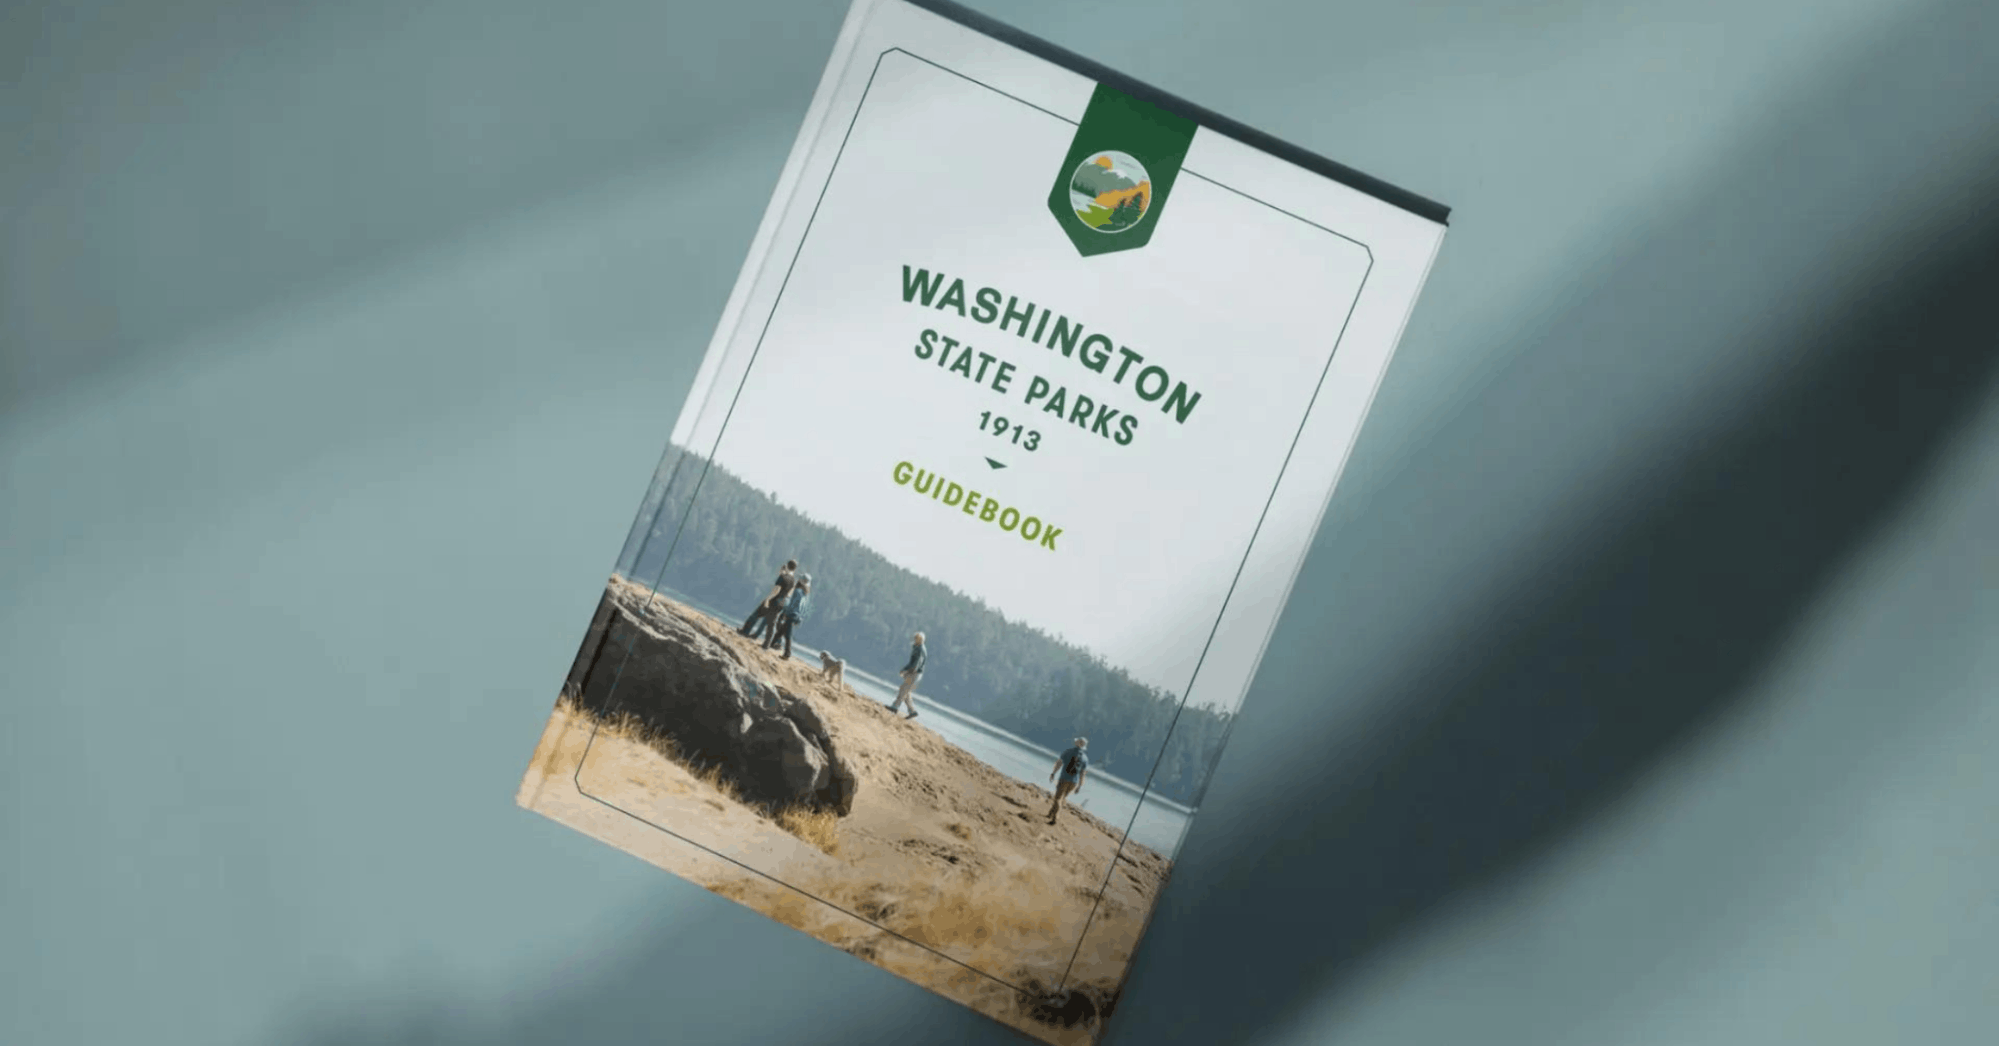 Washington State Parks guide book from People People